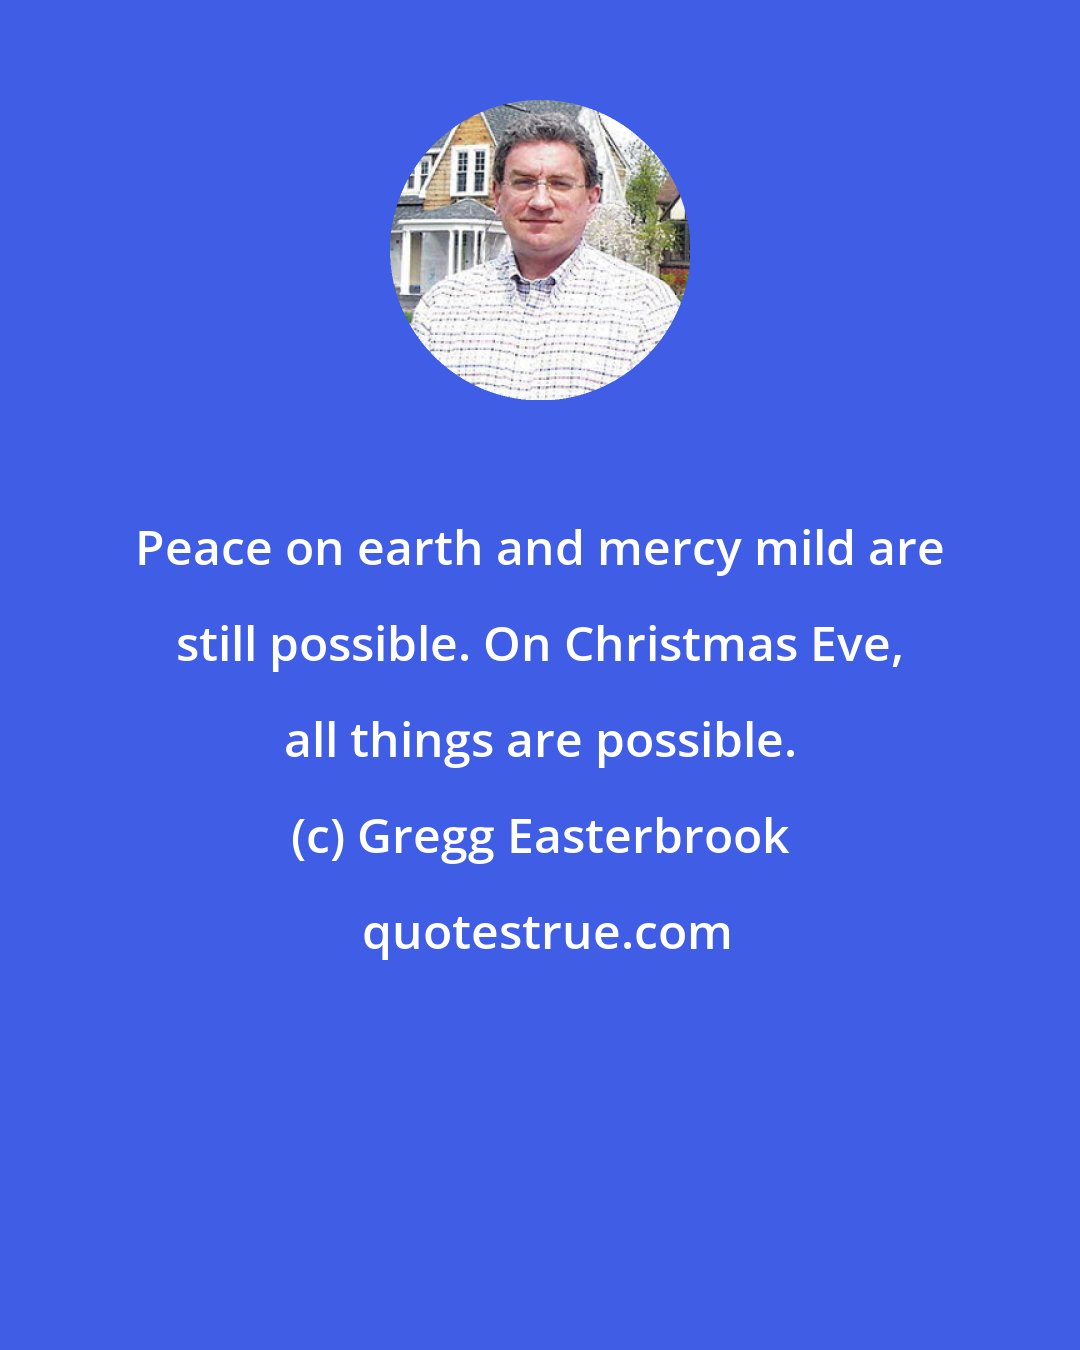 Gregg Easterbrook: Peace on earth and mercy mild are still possible. On Christmas Eve, all things are possible.